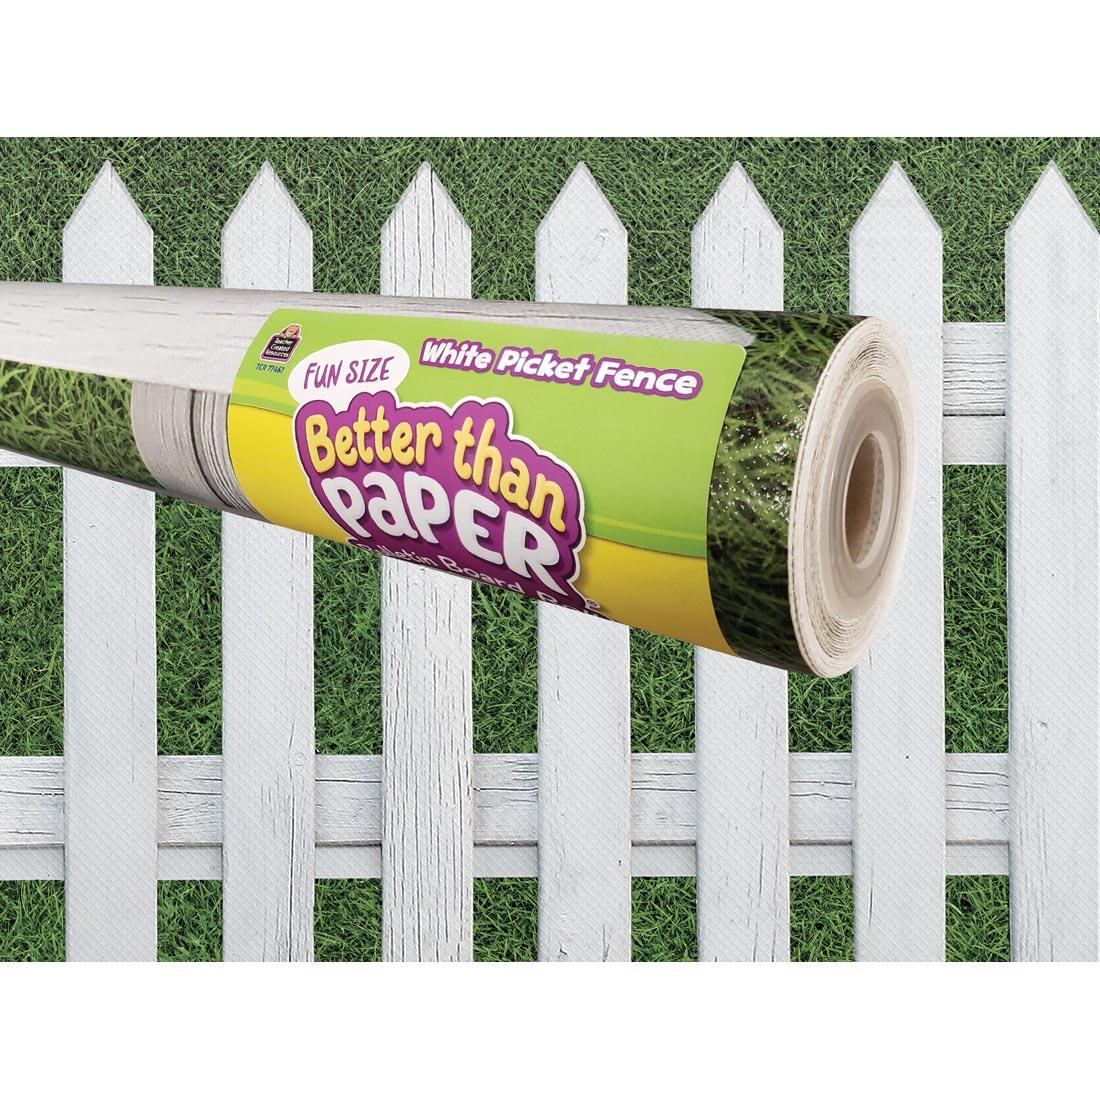 White Picket Fence Fun Size Better Than Paper Bulletin Board Roll with it shown in use in the background